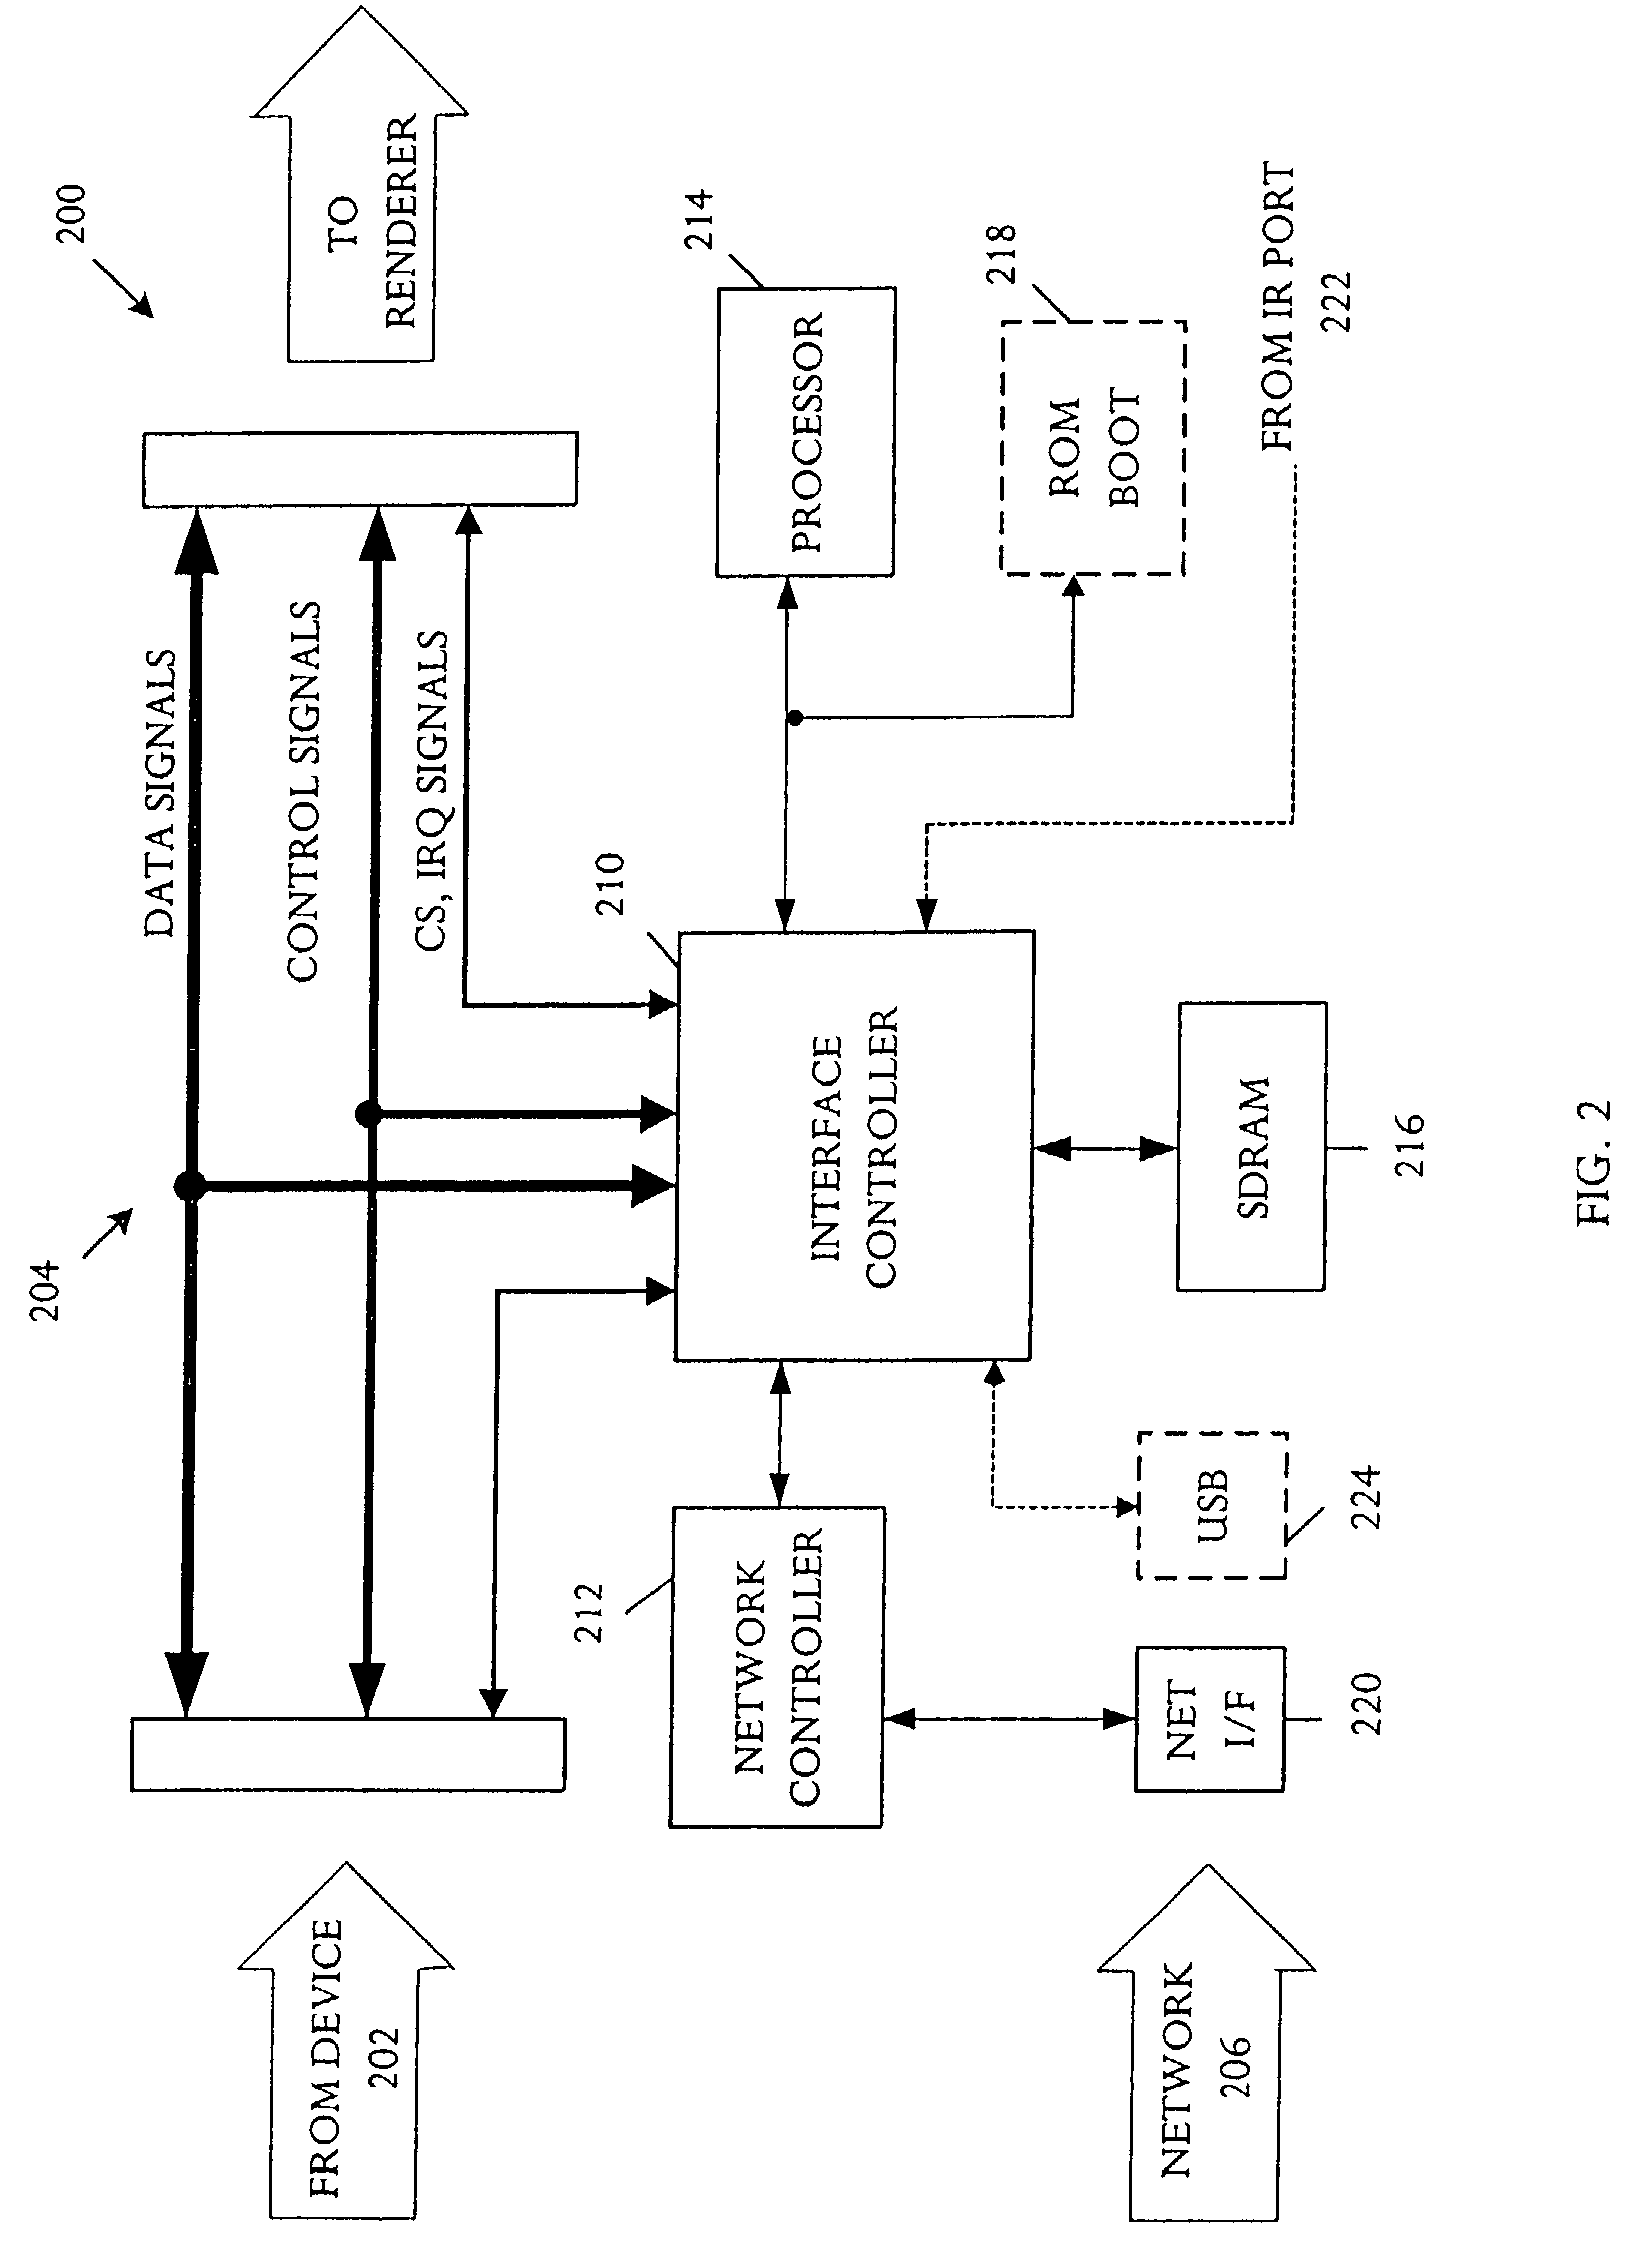 Emulator-enabled network connectivity to a device